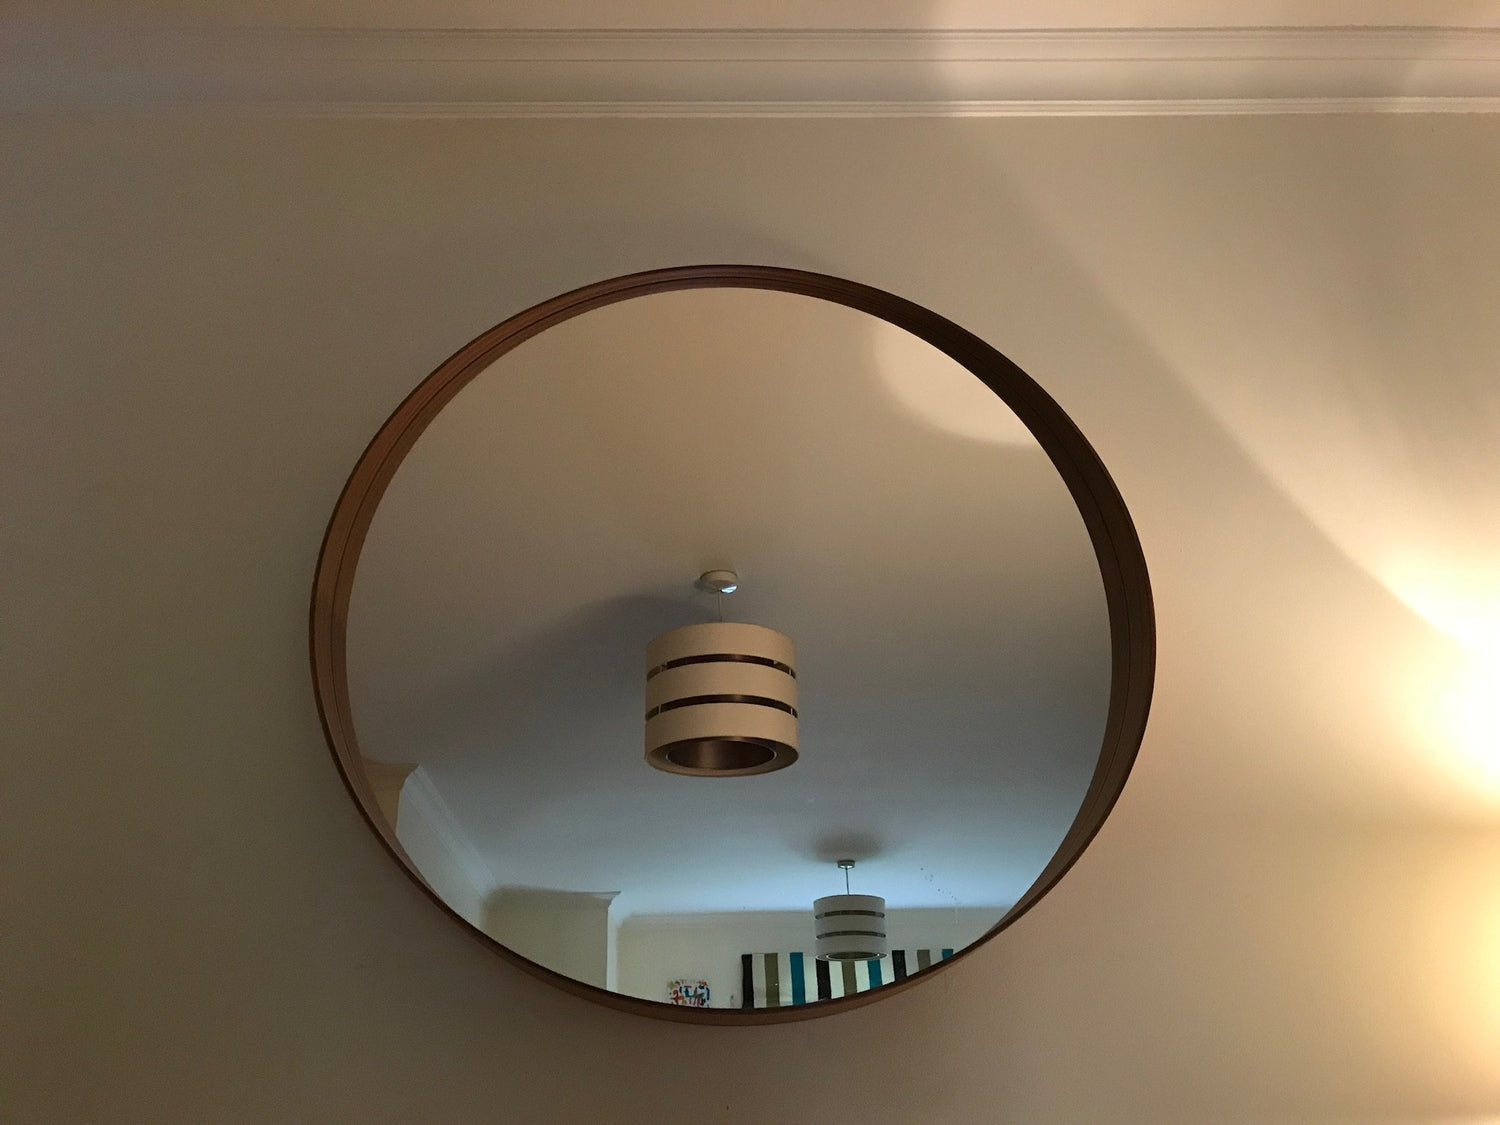 MD367 - Lightweight Coving above a mirror